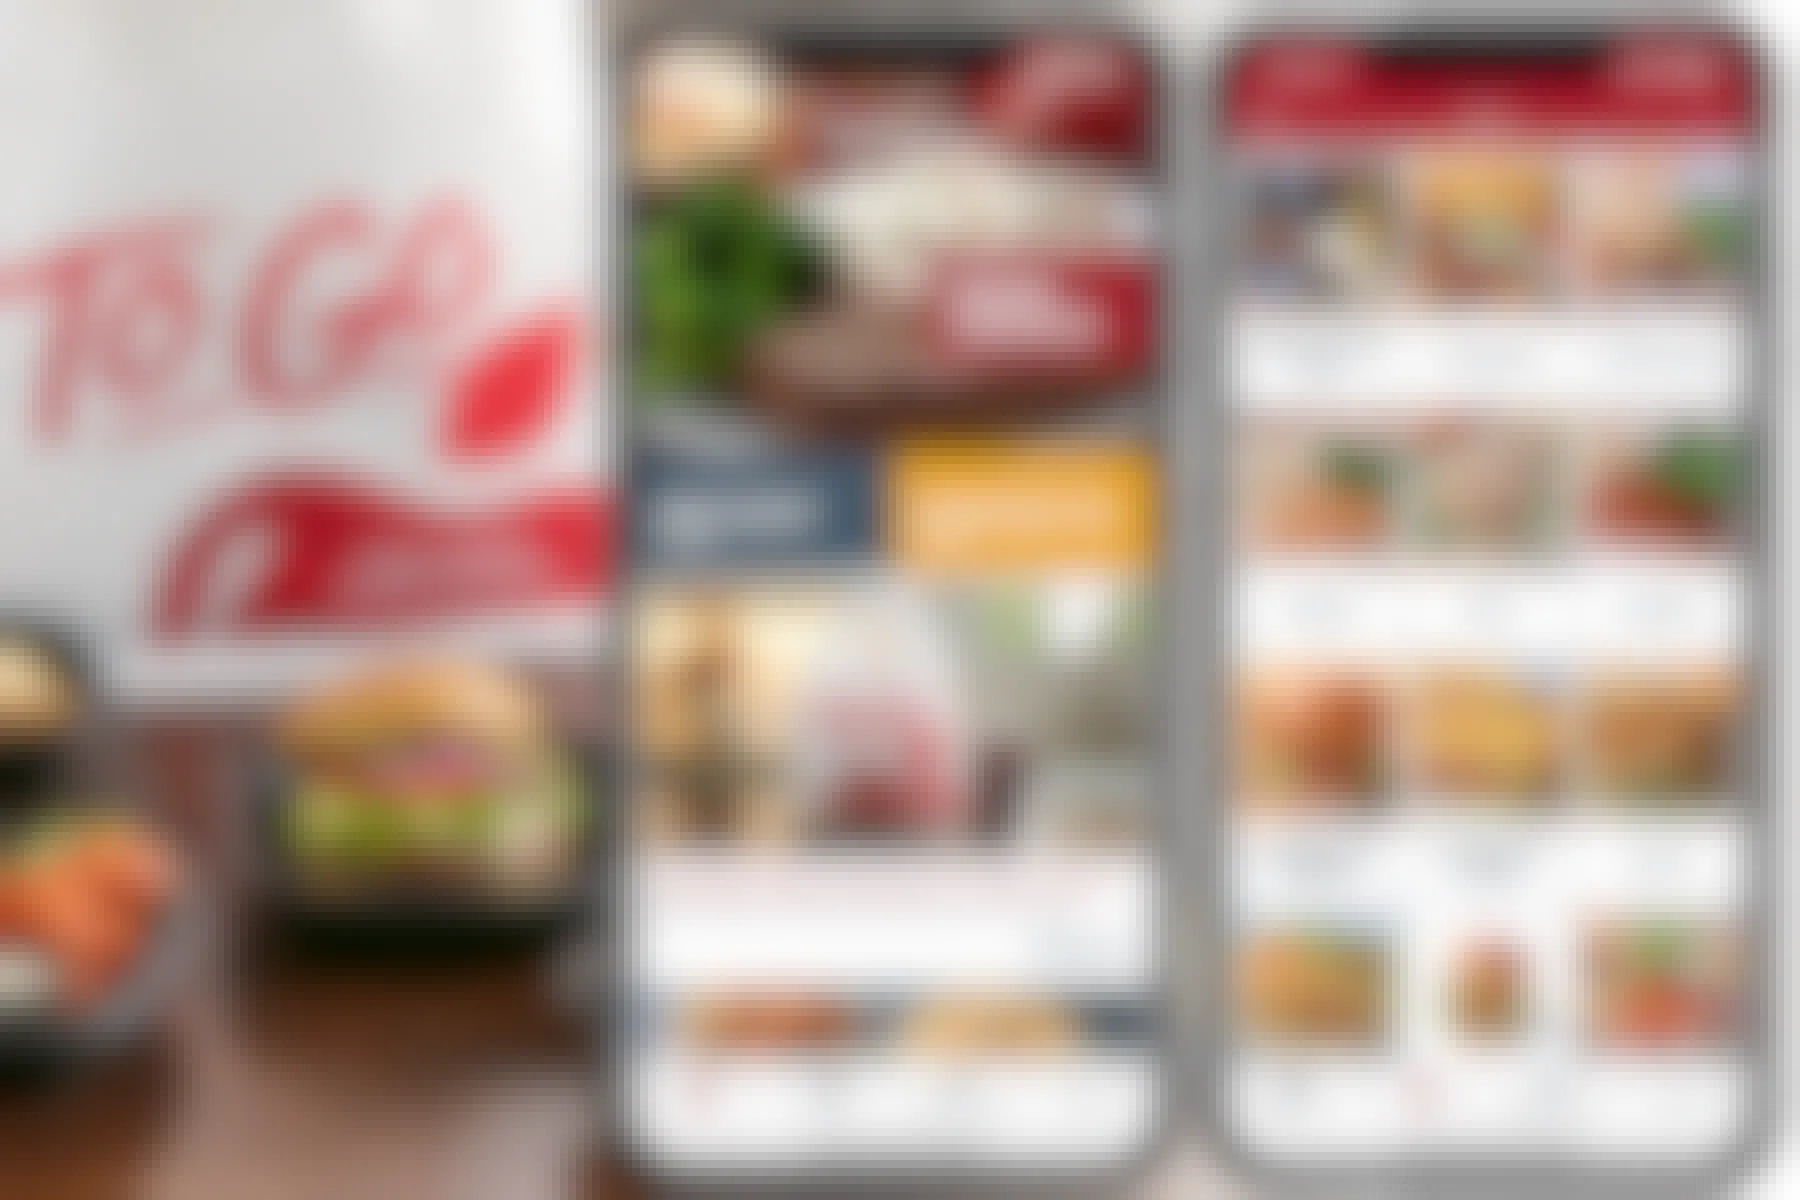 A graphic showing two iPhones, one showing the main page of the Applebee's mobile app and the other showing the Menu page on the Applebee's mobile app, next to an image of food in to-go containers on a table next to an Applebee's To-Go bag.